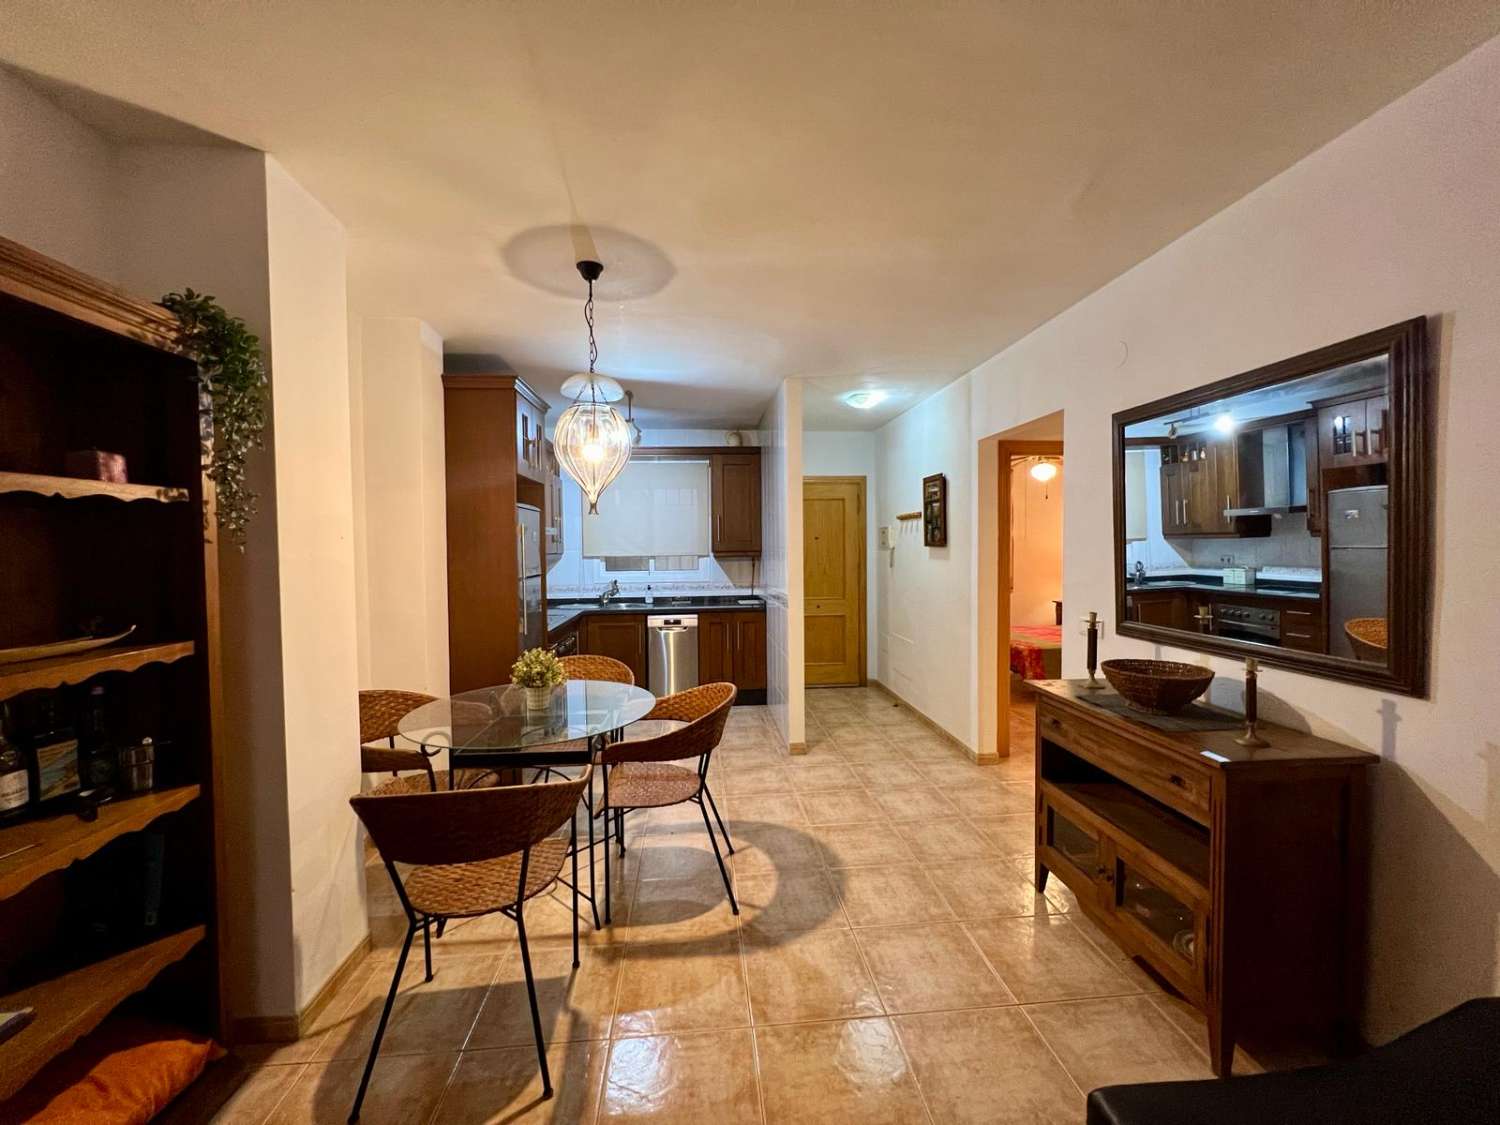 ONE BED APARTMENT NEAR CARABEO AND PARADOR